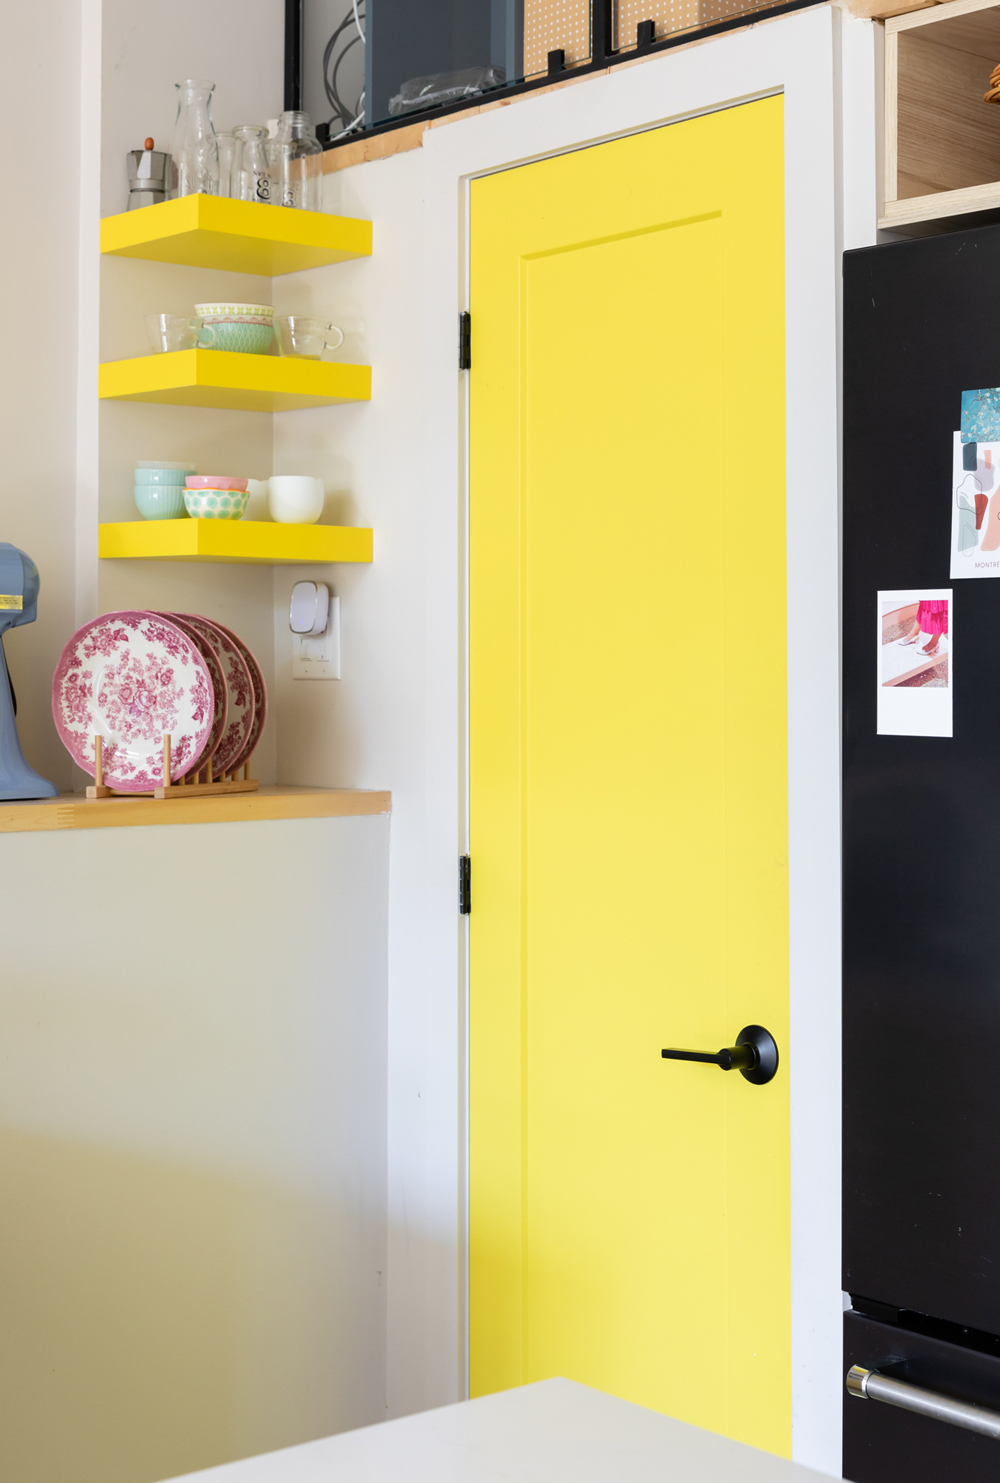 A bright lemon-yellow door in a white room next to yellow open shelves